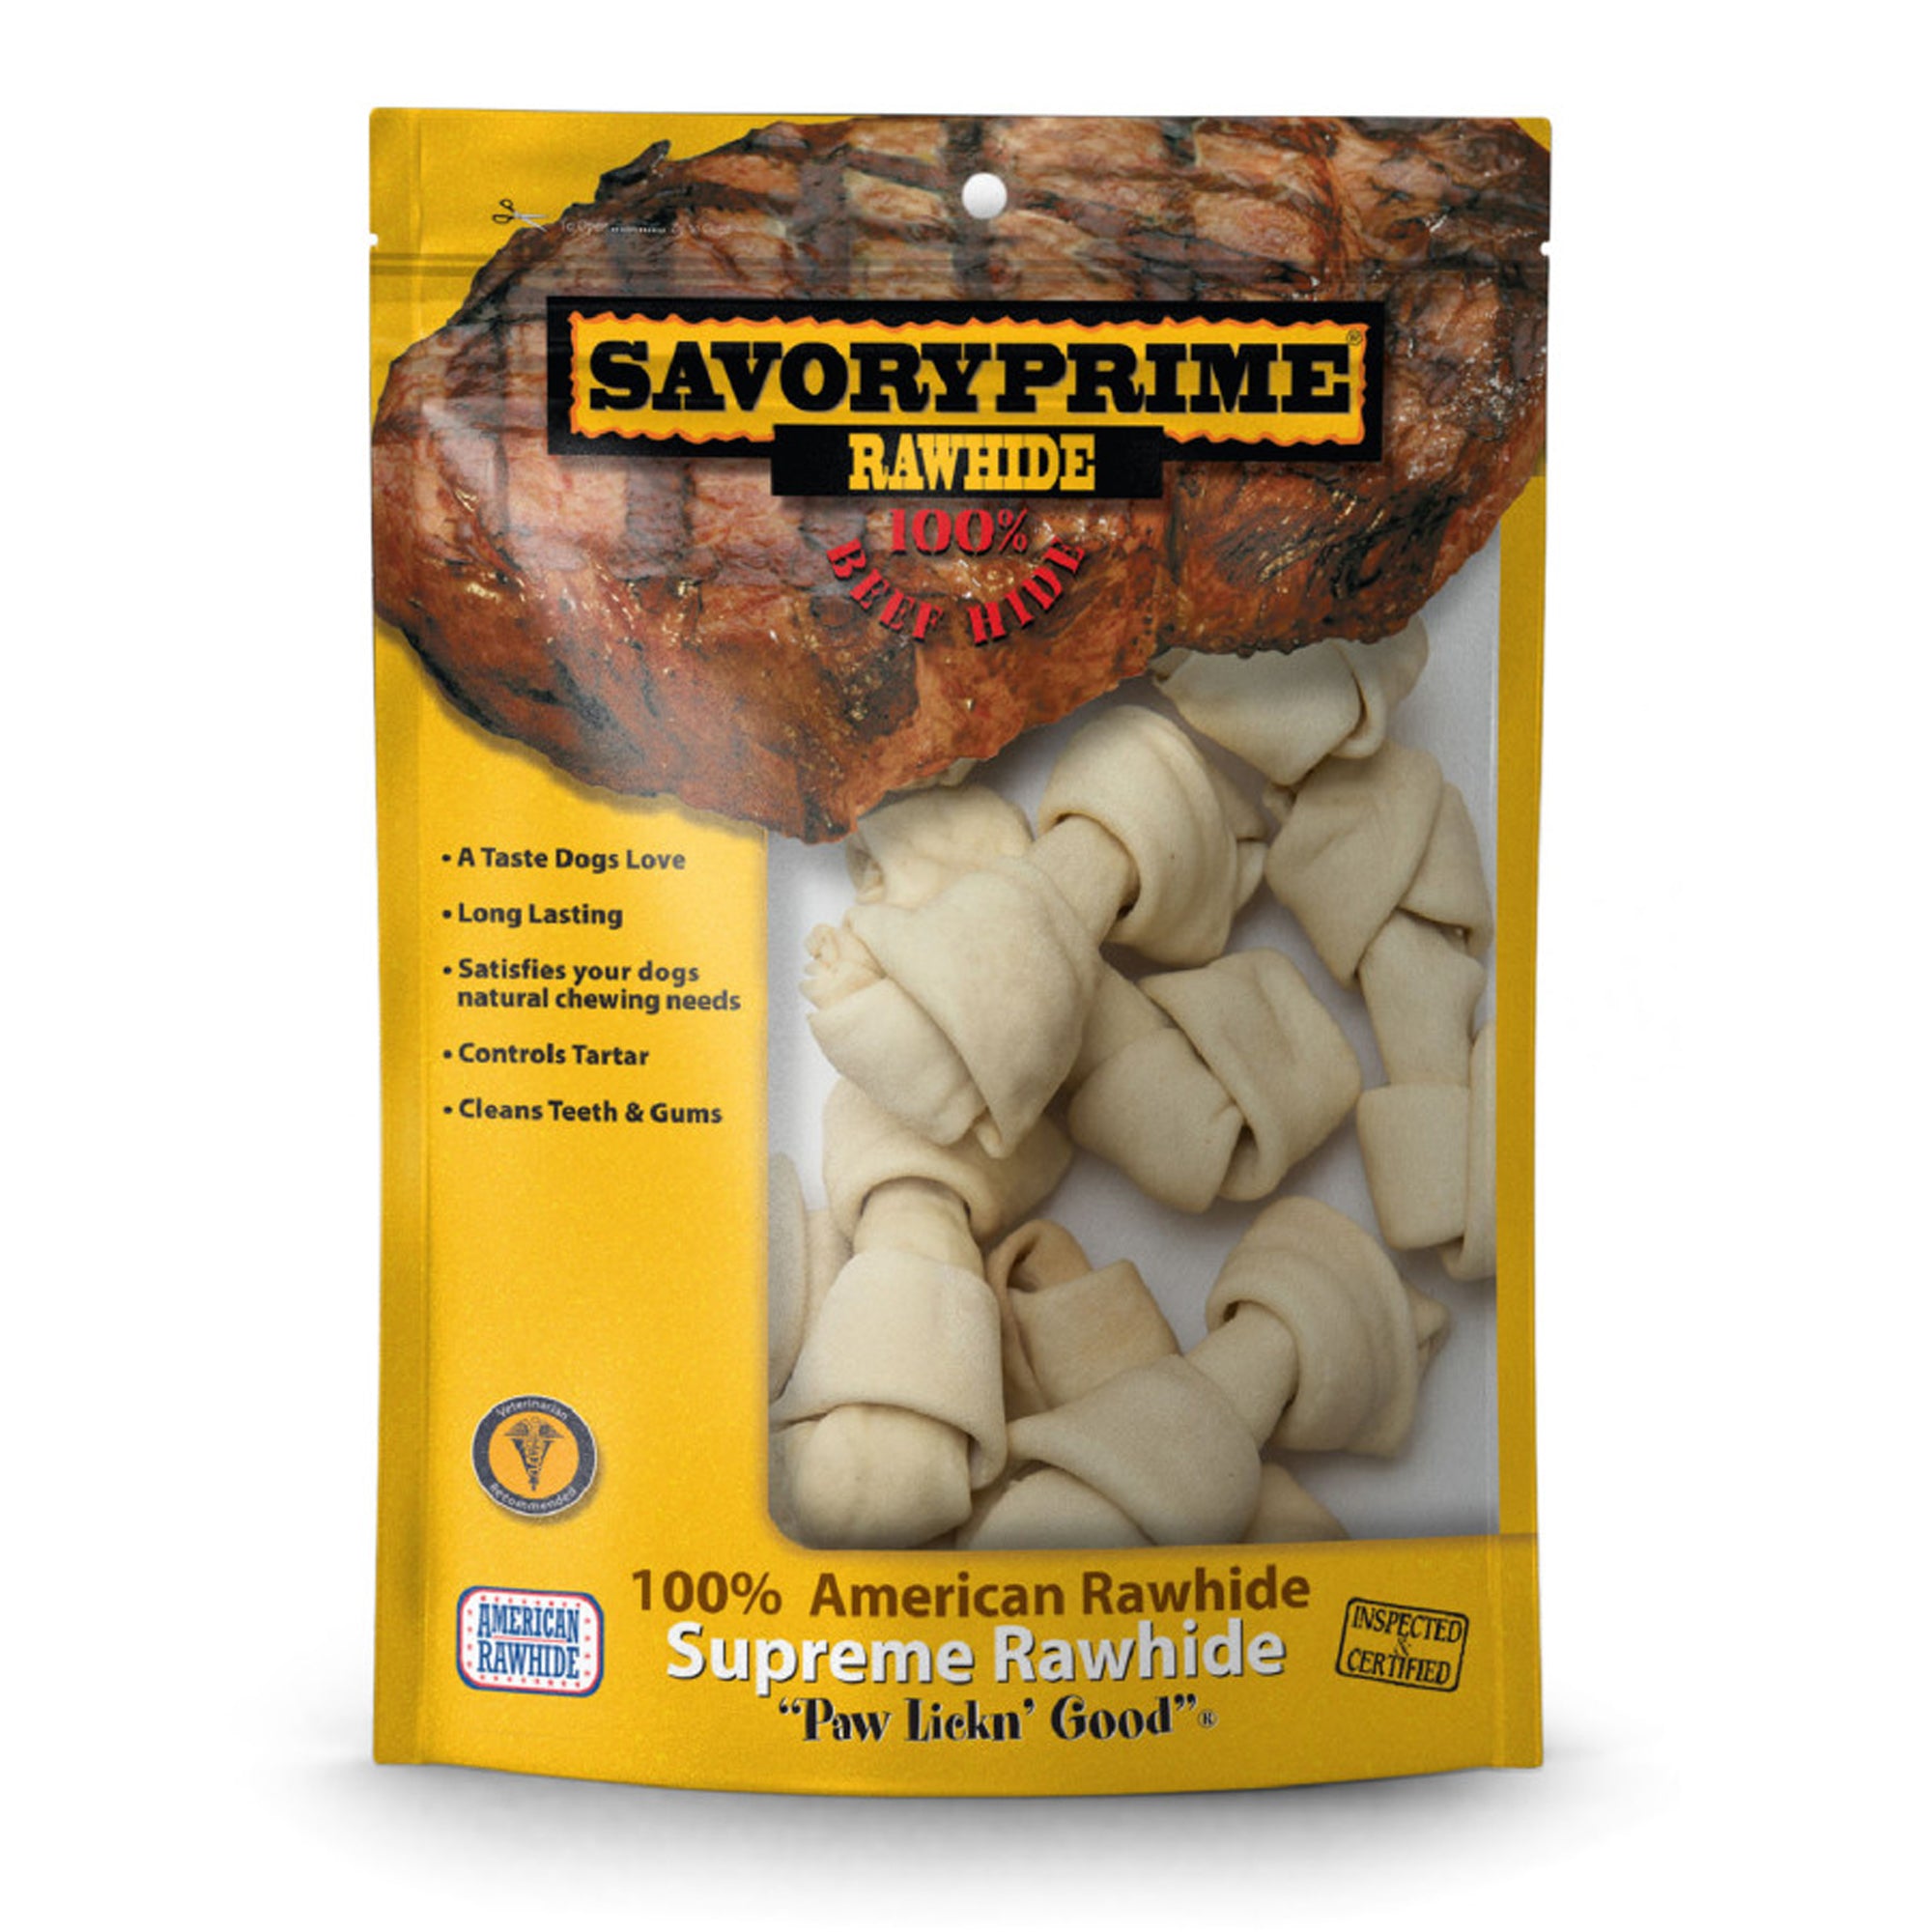 Savory Prime Small Bone Value Pack White 4-5 in 10 Count